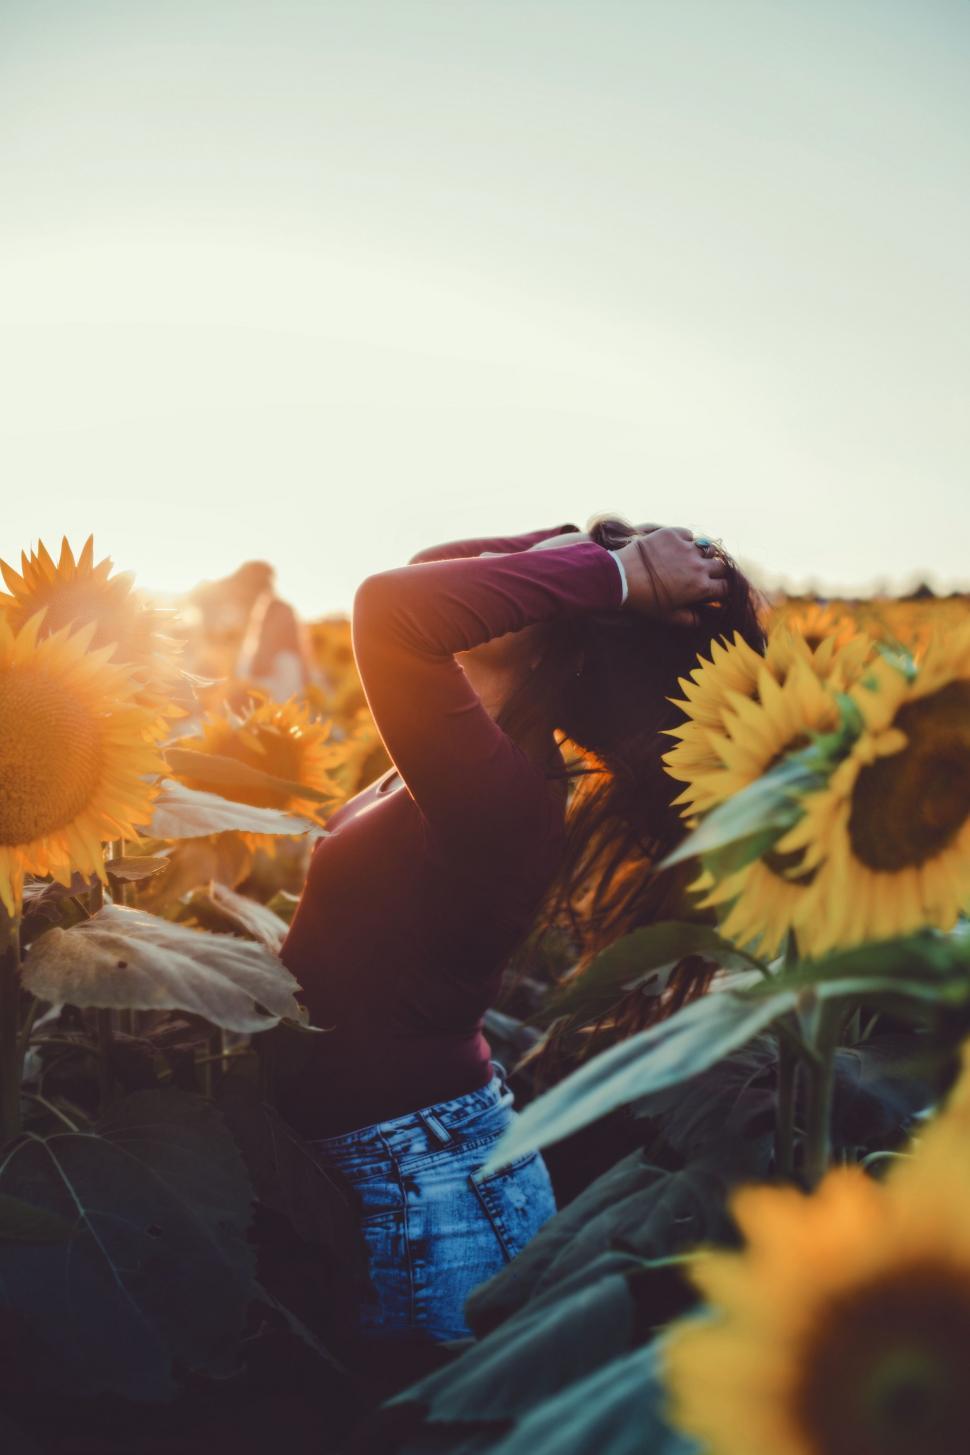 Free Image of Woman Laying in a Field of Sunflowers 